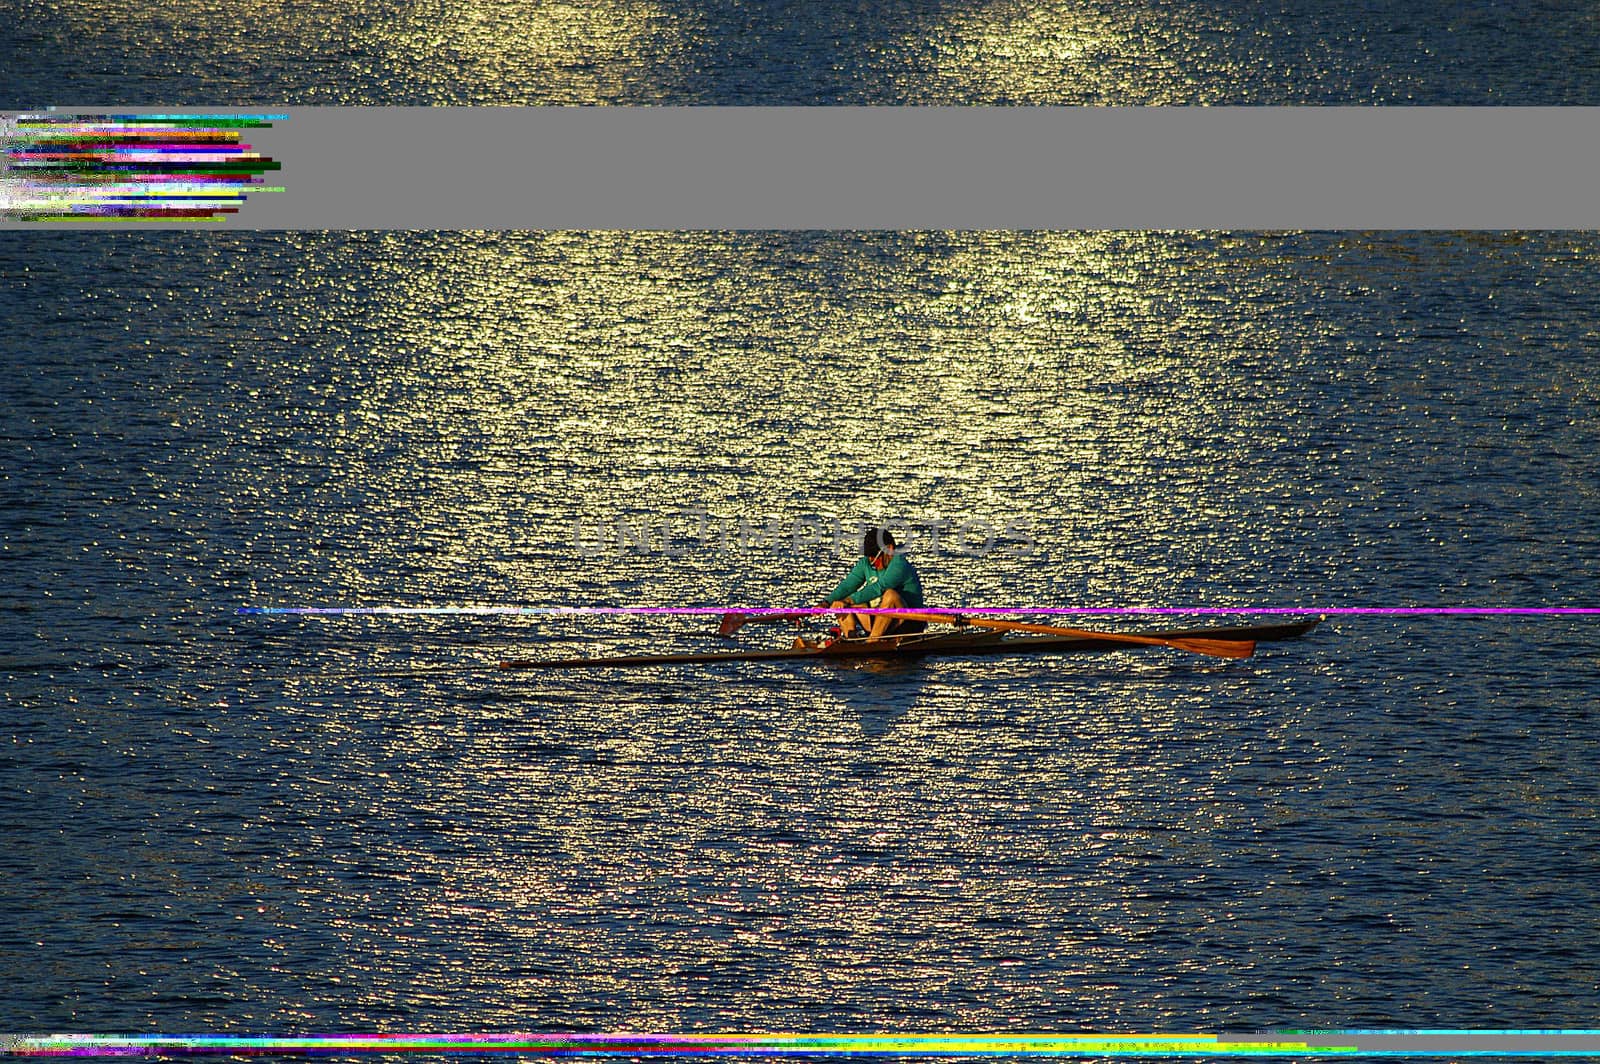 Rower at Sunrise on Lake Union by cestes001